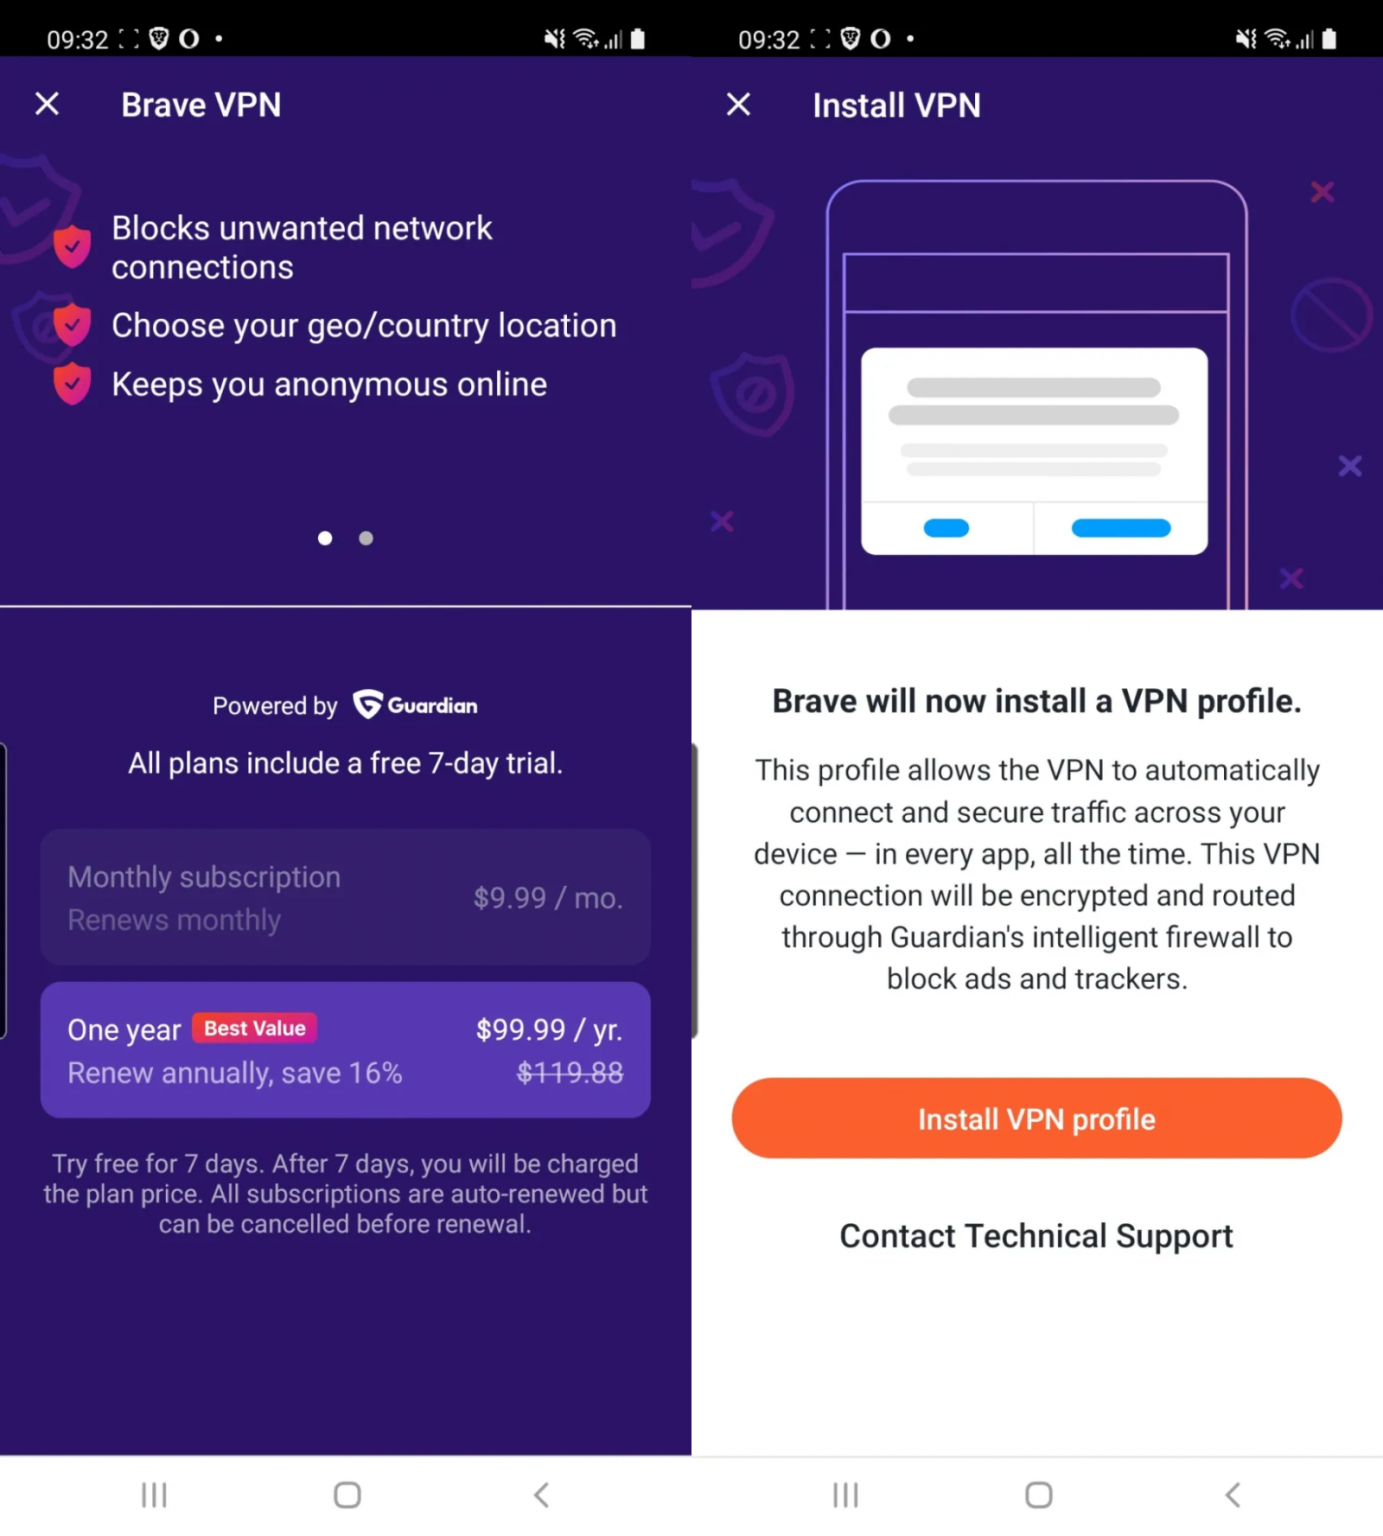 Brave partners with Guardian to bring a paid VPN and Firewall to its